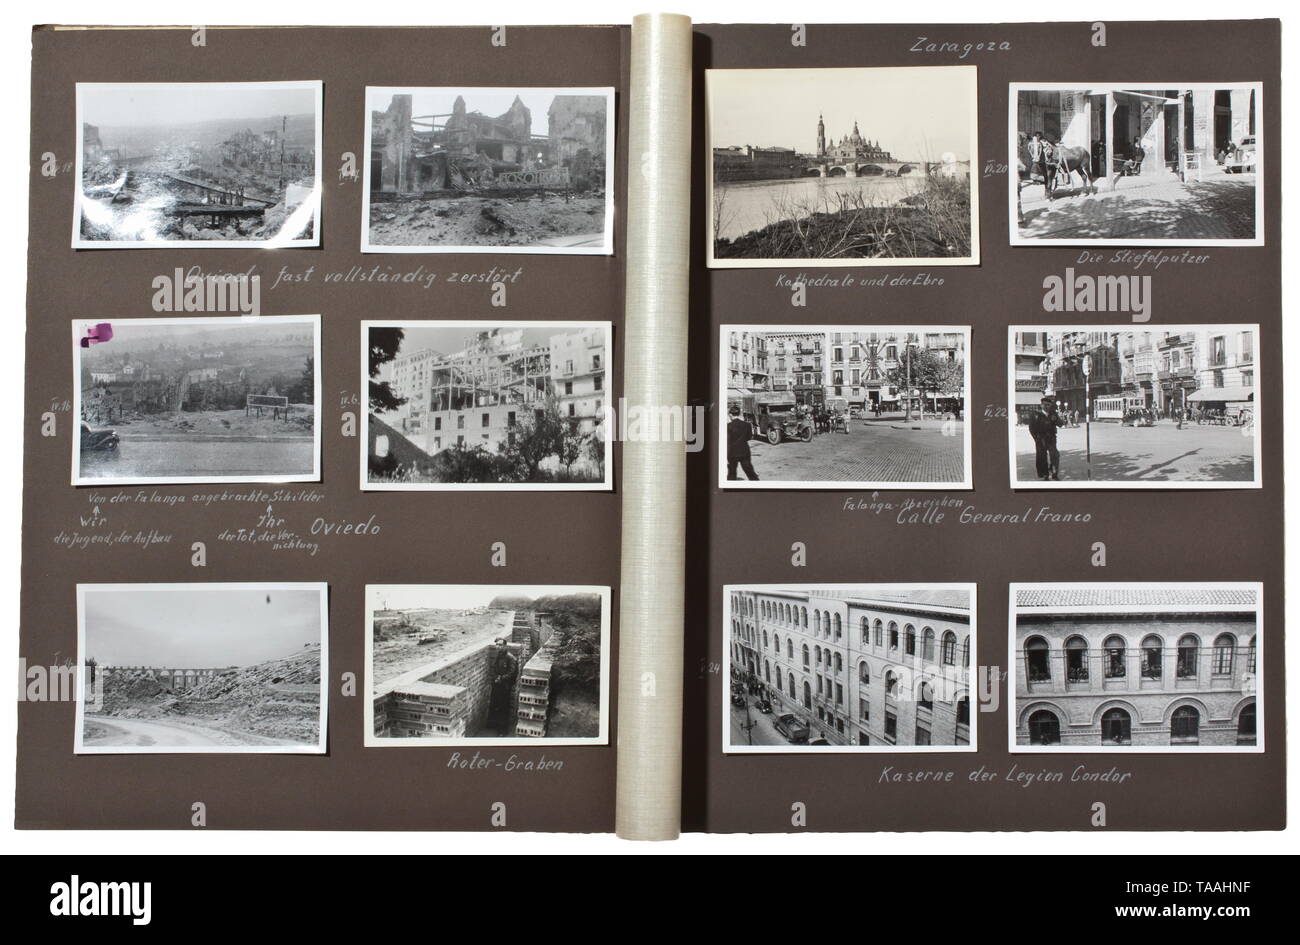 A photo album on the Spanish Civil War (1936 - 39) - Legion Condor With more than 280 excellent photographs of technical and geographical features. The album with captions, with information given by a regional manager of the truck section for Spain and Portugal of the company Henschel from Kassel. Several pictures of trucks in use, airplanes, Spanish cities (Burgos, Sevilla, Bilbao, Santander, Teruel, Lerida etc.). Also air raid shelters and positions, marching troops, destroyed buildings, fights at the Ebro, Teruel and Cubla fronts. With a pin for Henschel salesmen in Port, Editorial-Use-Only Stock Photo